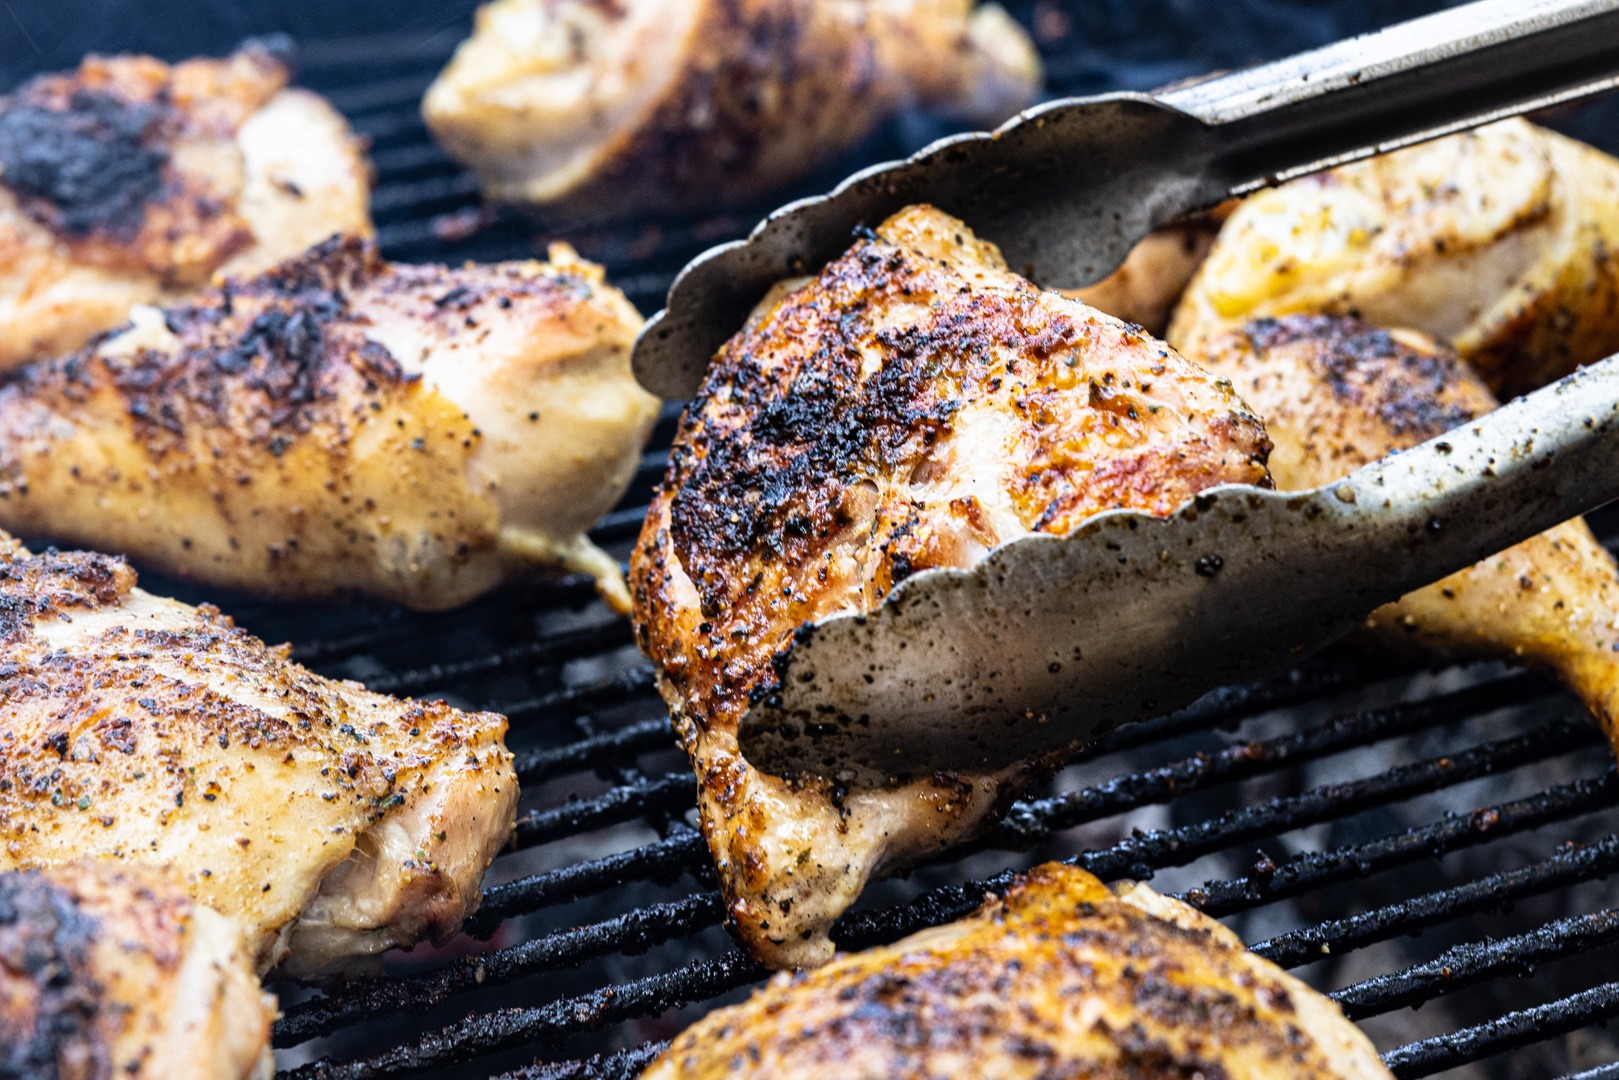 Turning chicken on the grill